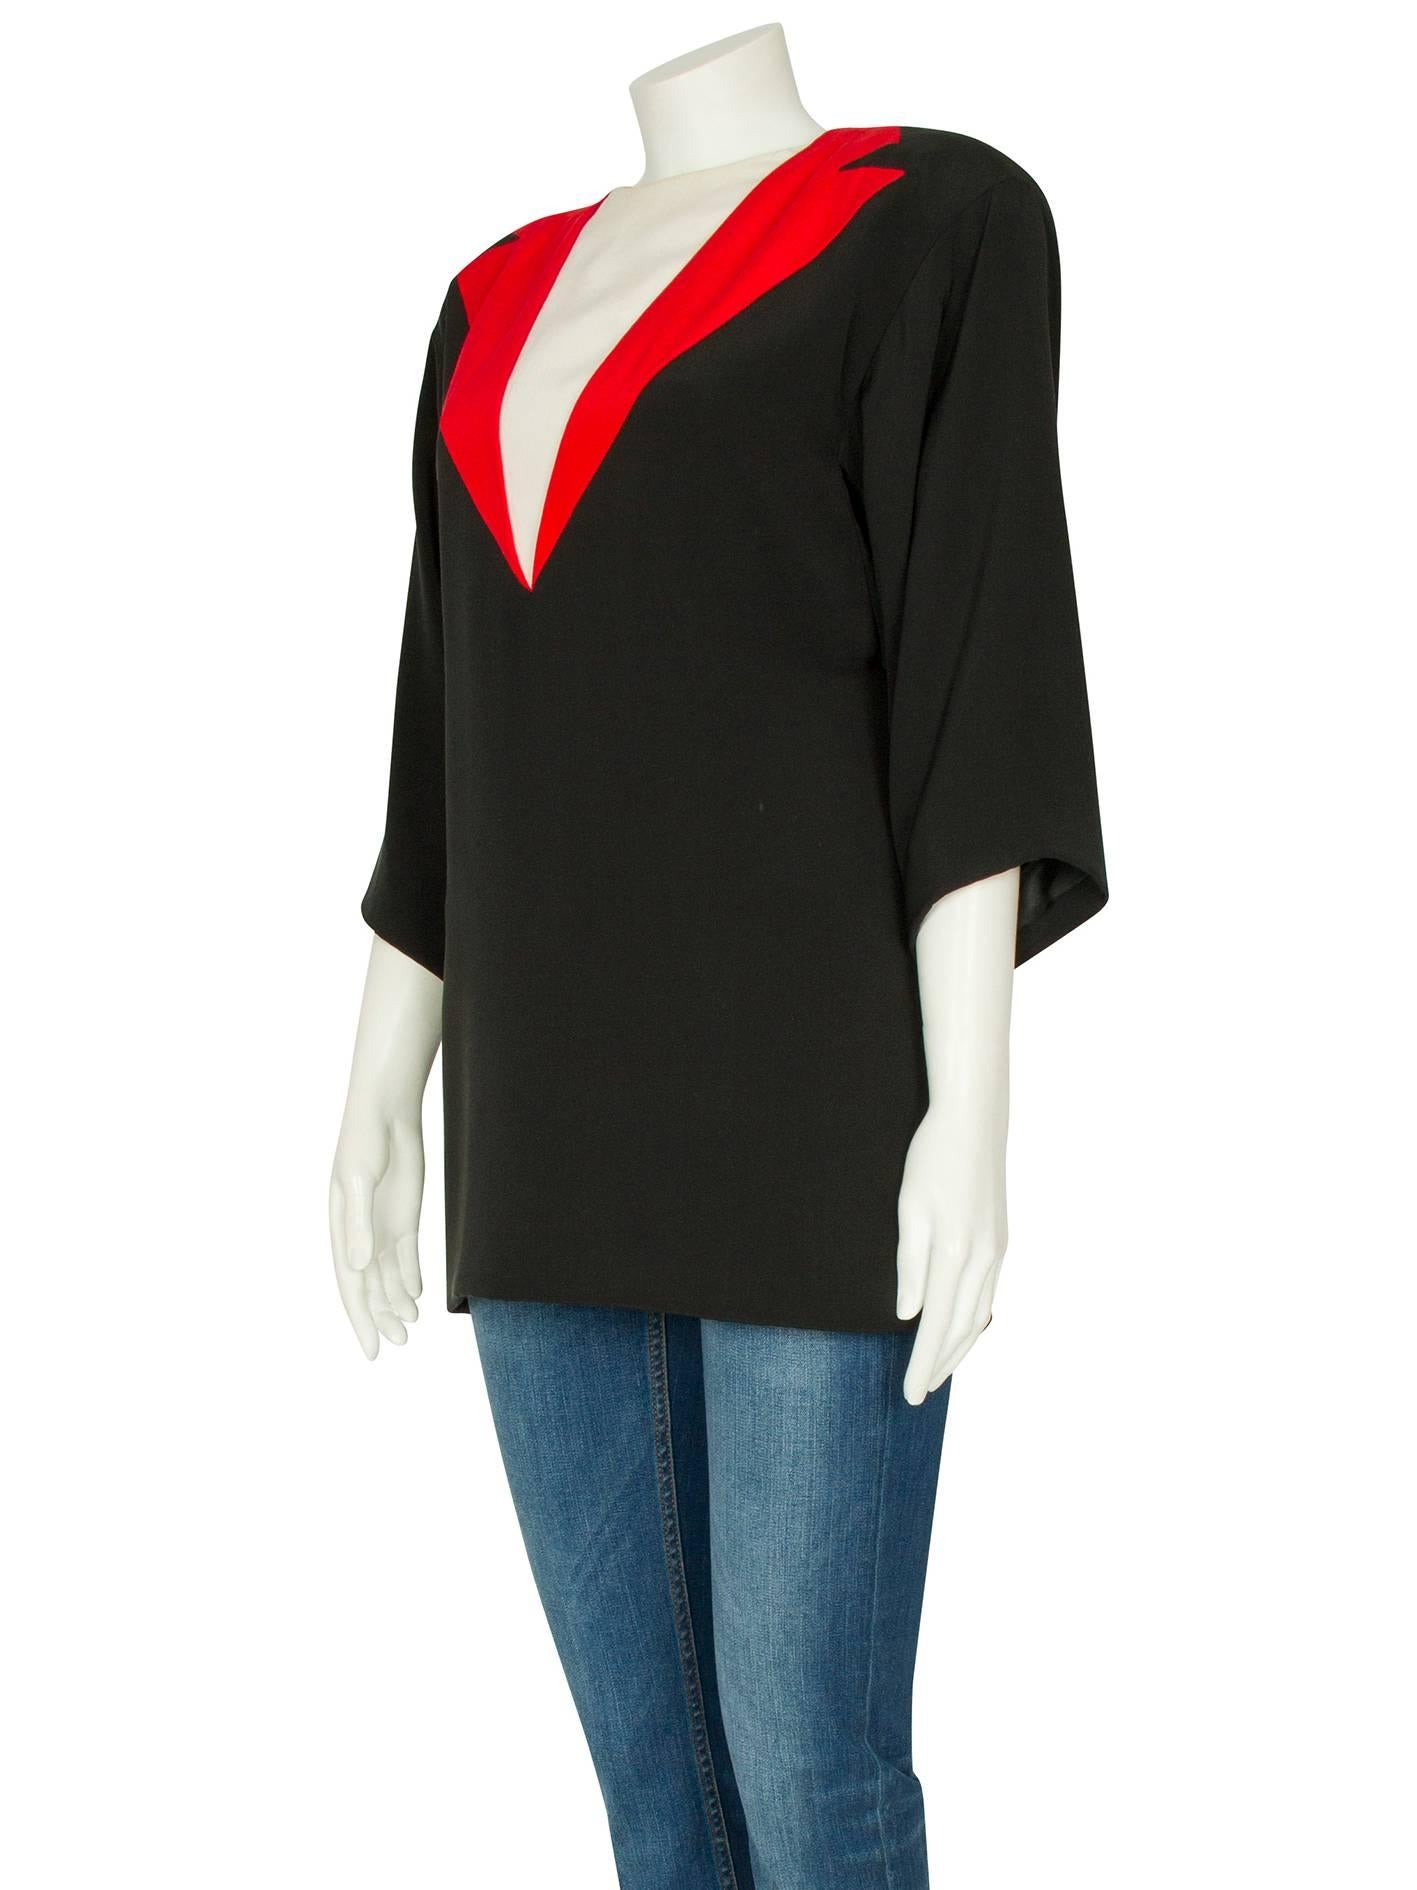 S/S 1983 Dior Couture Black Red & Ivory Silk Trompe L'Oeil Boxy Tunic In Excellent Condition For Sale In London, GB